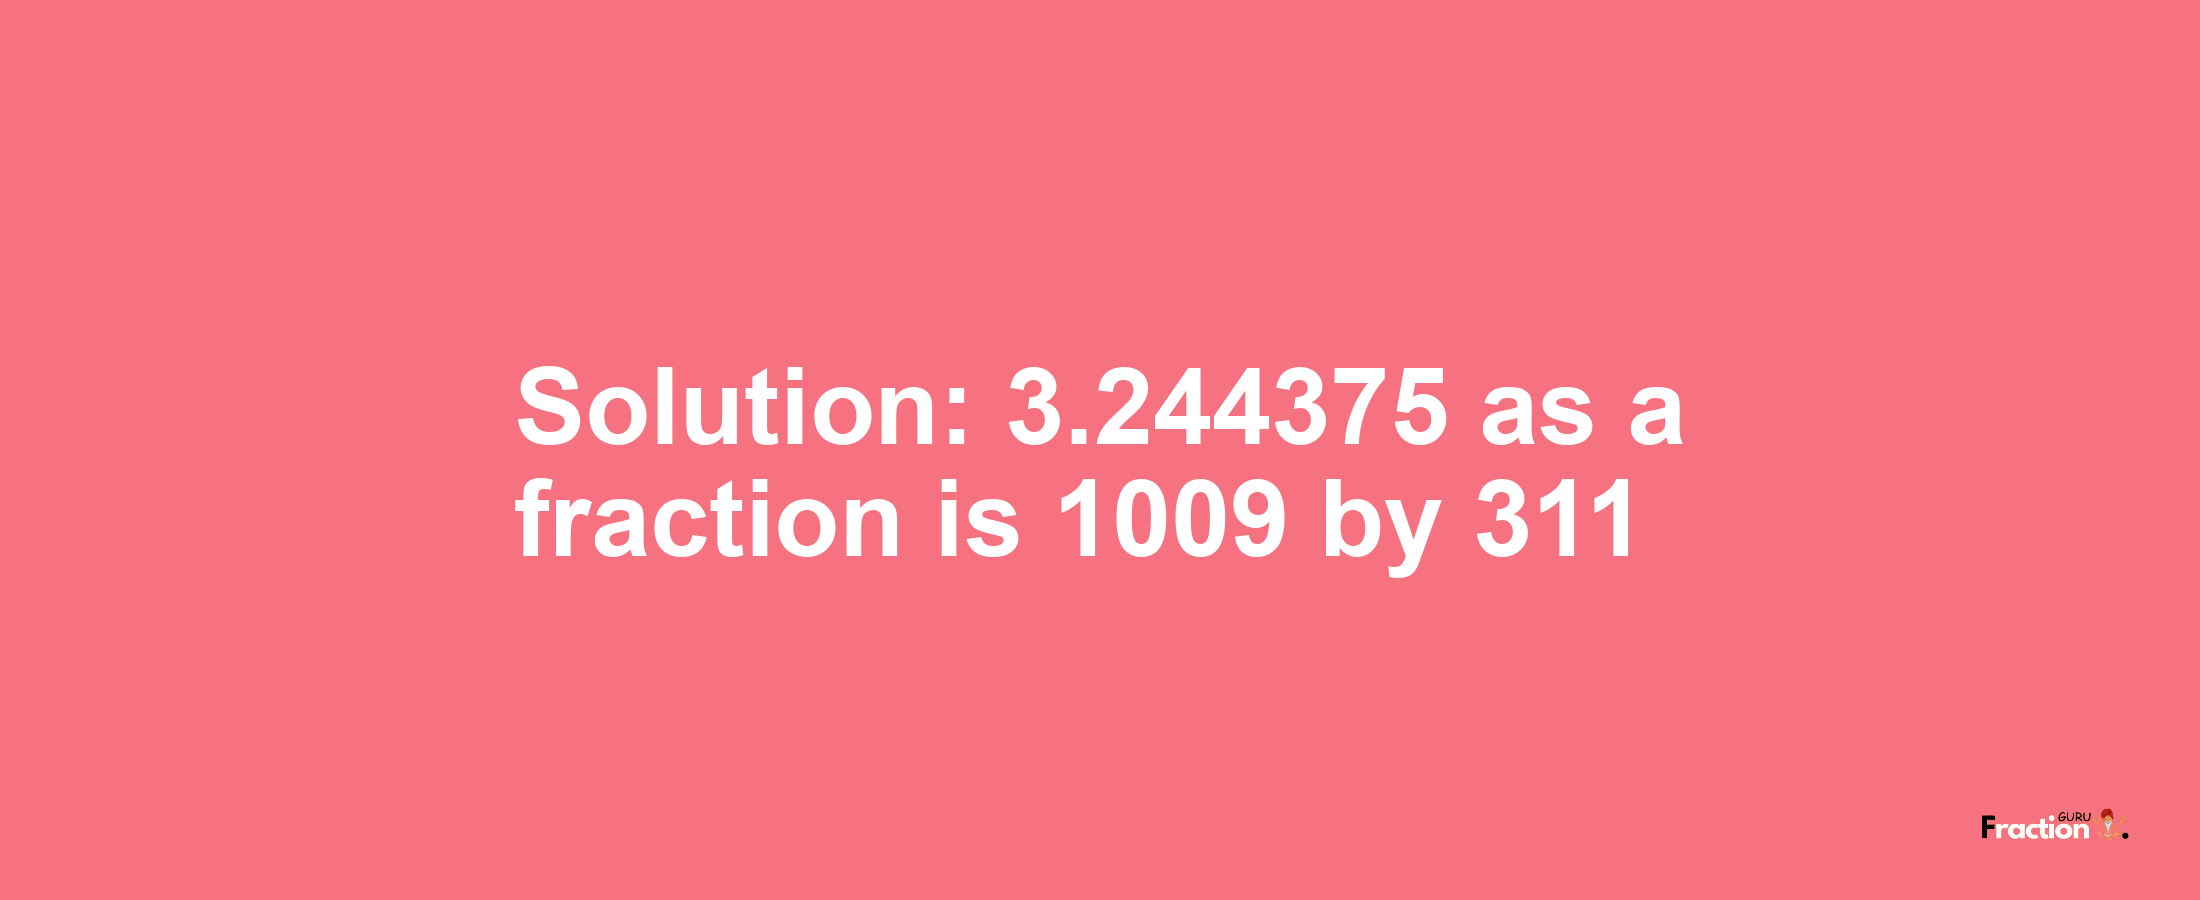 Solution:3.244375 as a fraction is 1009/311